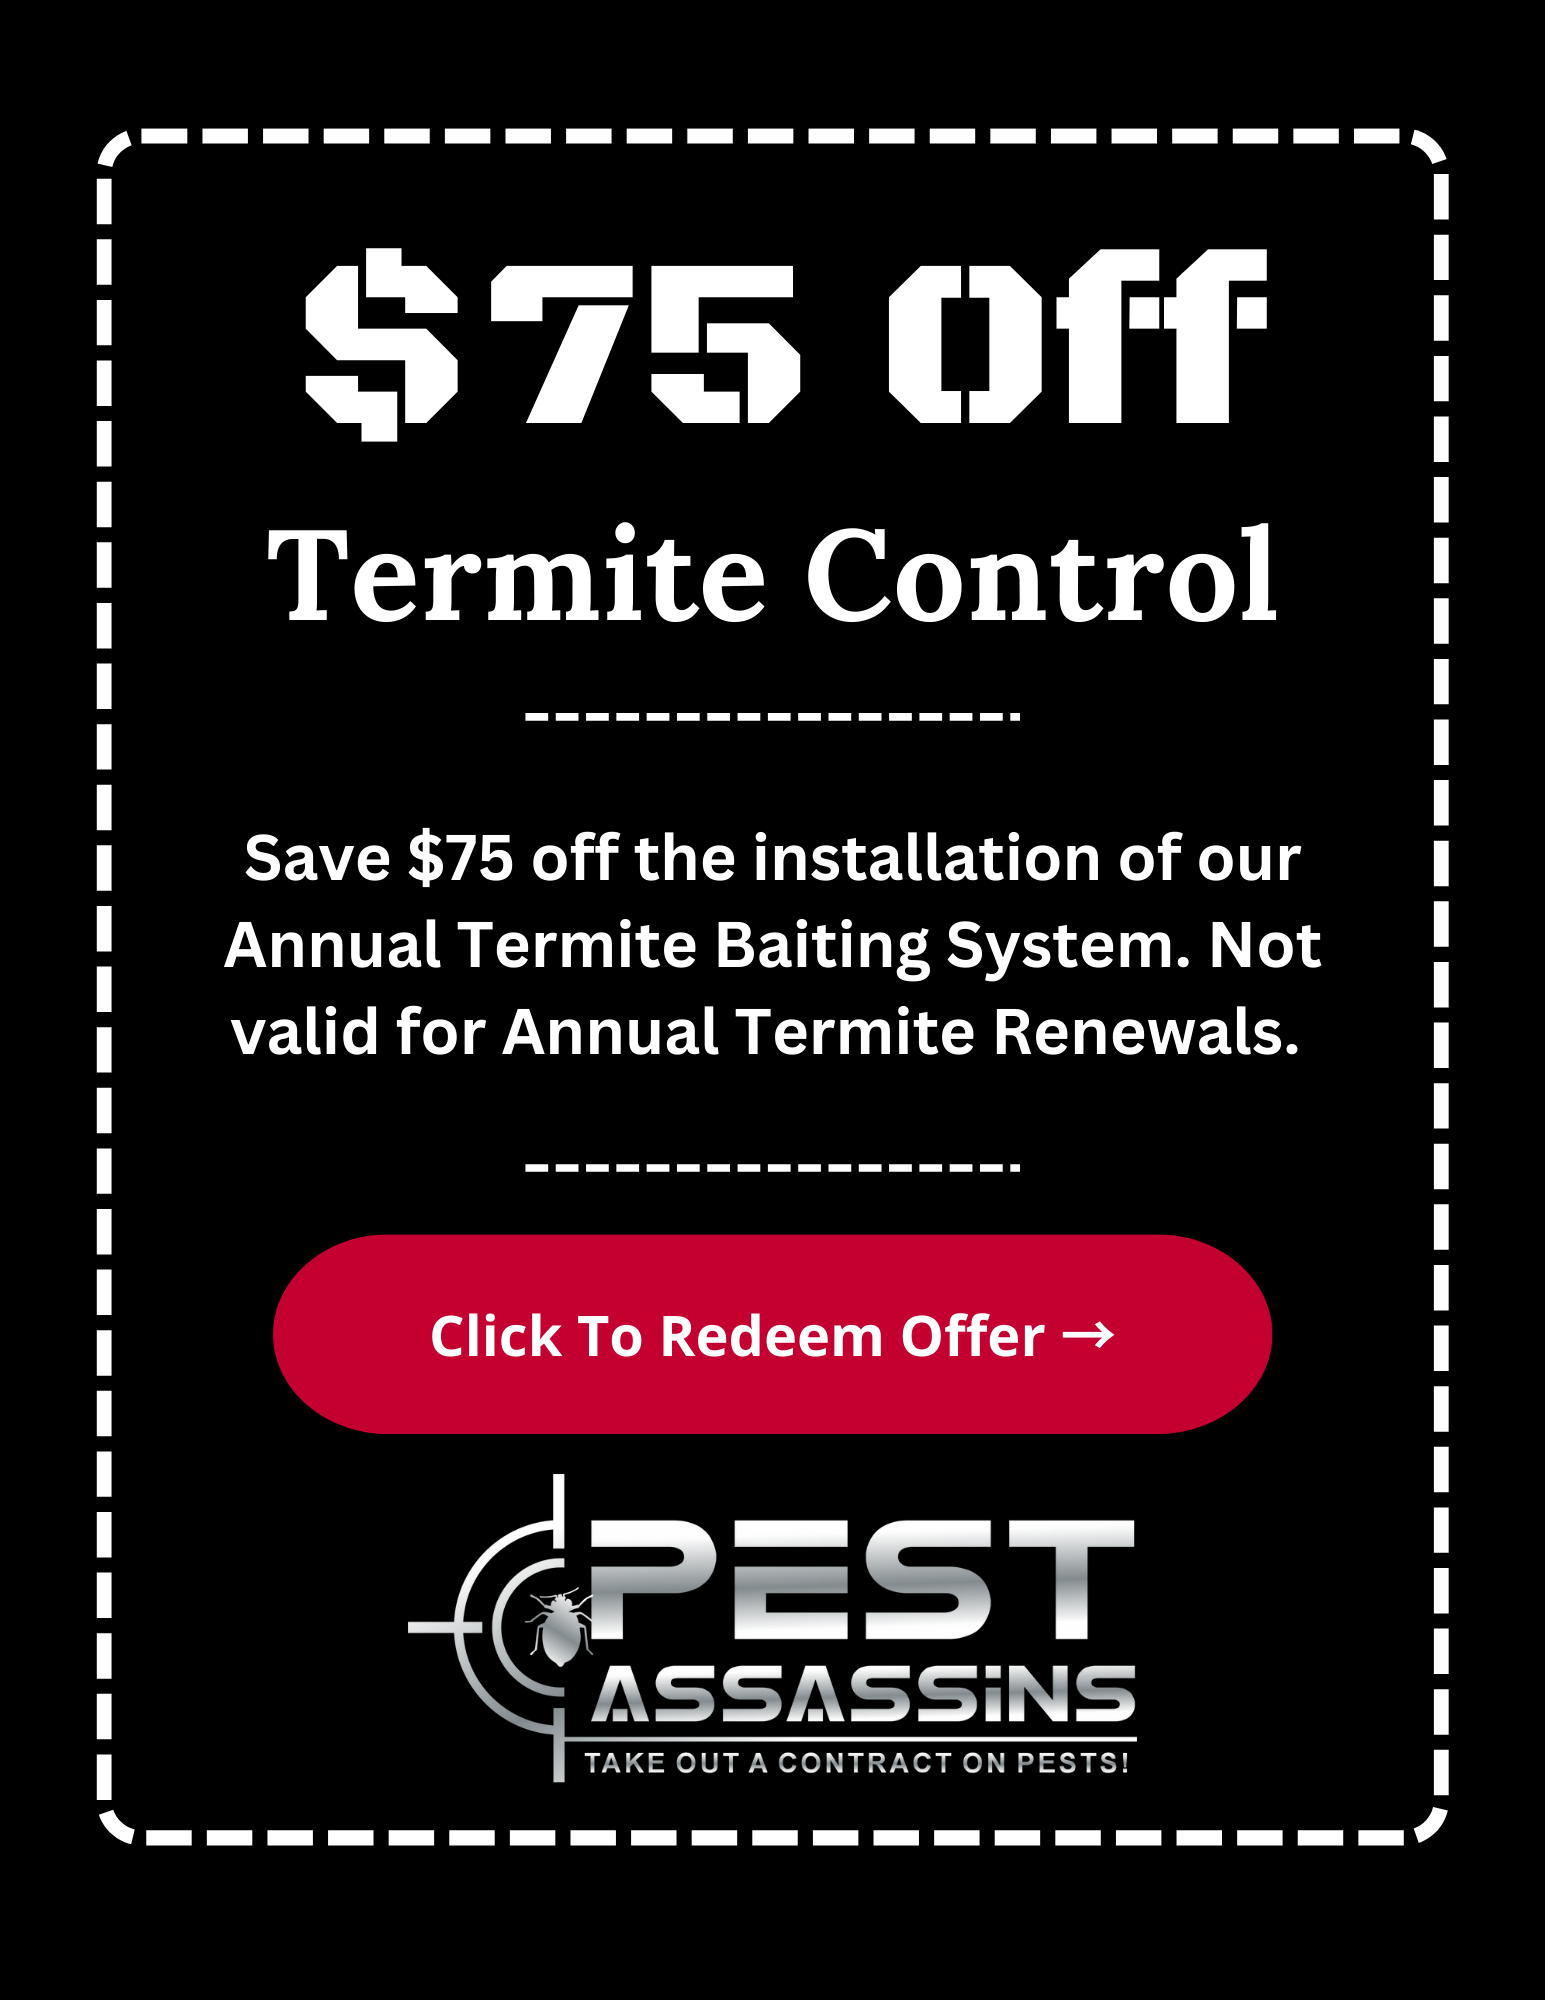 Termite control discount coupon offer